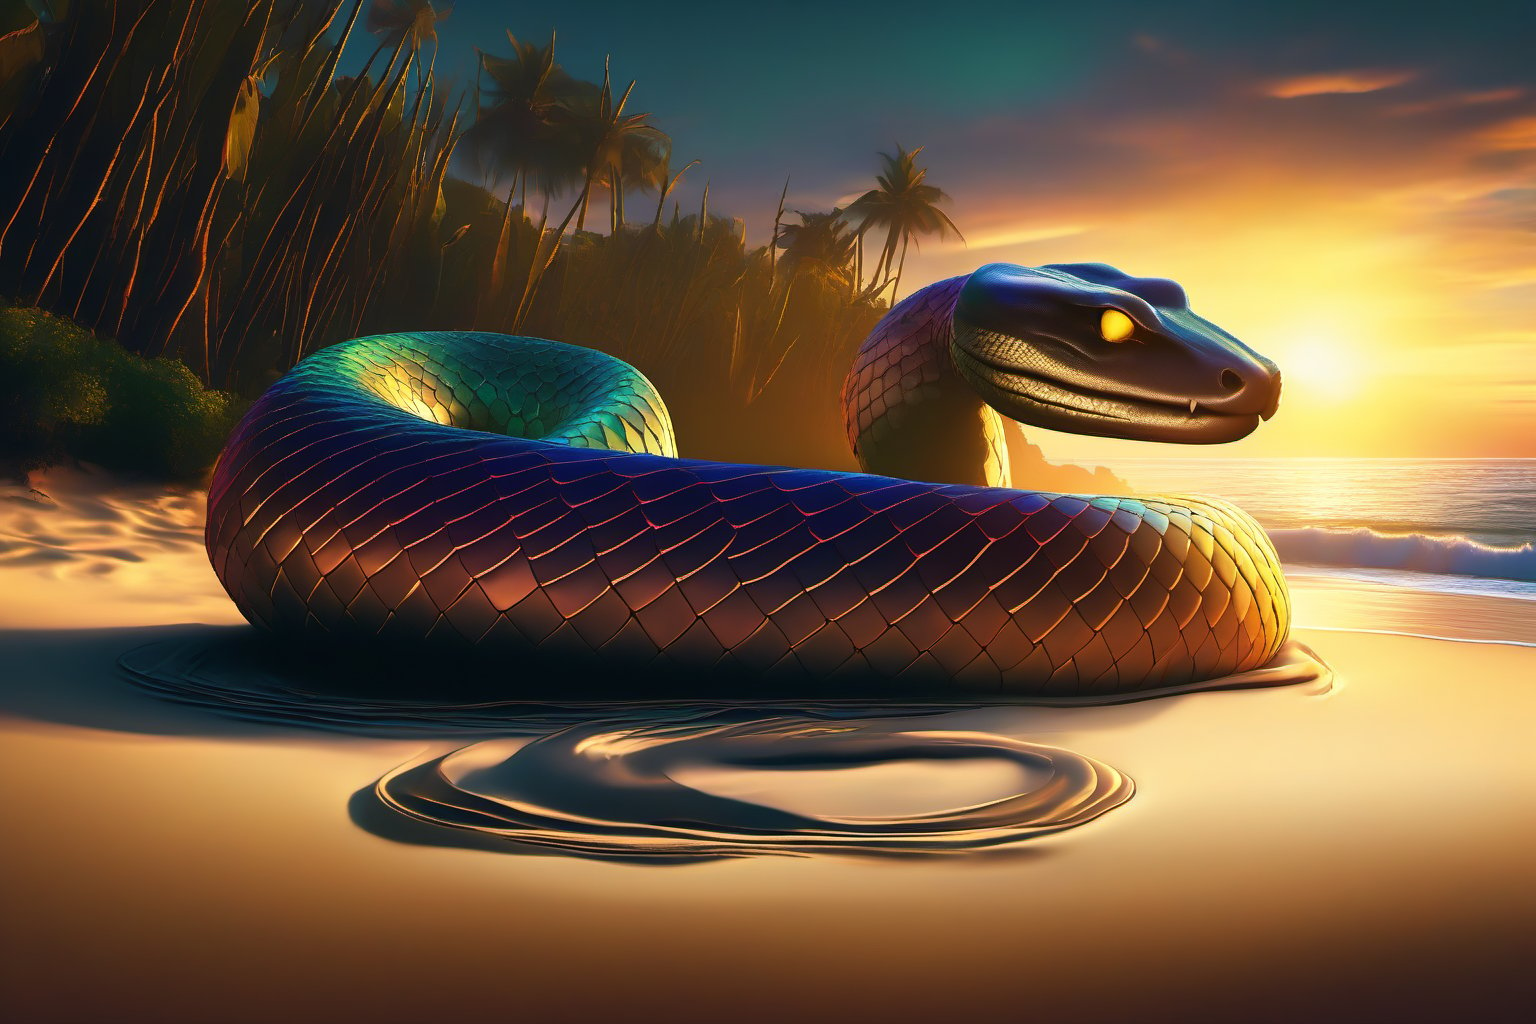 A majestic giant snake with vibrant striped scales slithers across a sandy beach, its body undulating in harmony with the rhythmic waves crashing against the shore. Warm sunlight casts a golden glow on its scaly skin, accentuating the iridescent colors of its stripes as it raises its head to survey its tropical surroundings.